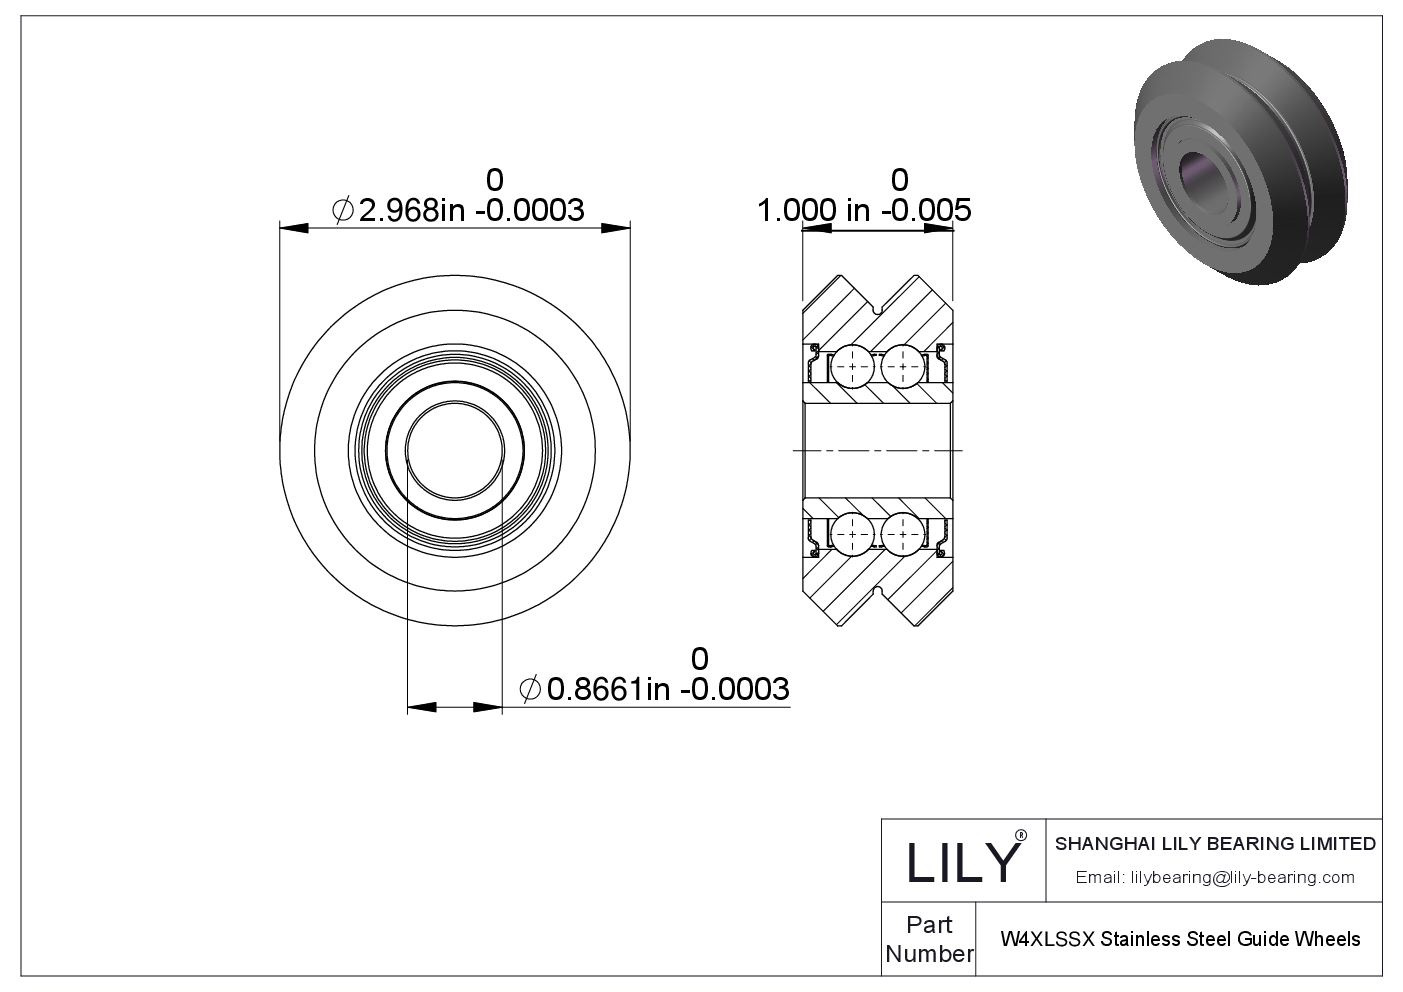 W4XLSSX Stainless Steel Guide Wheels cad drawing